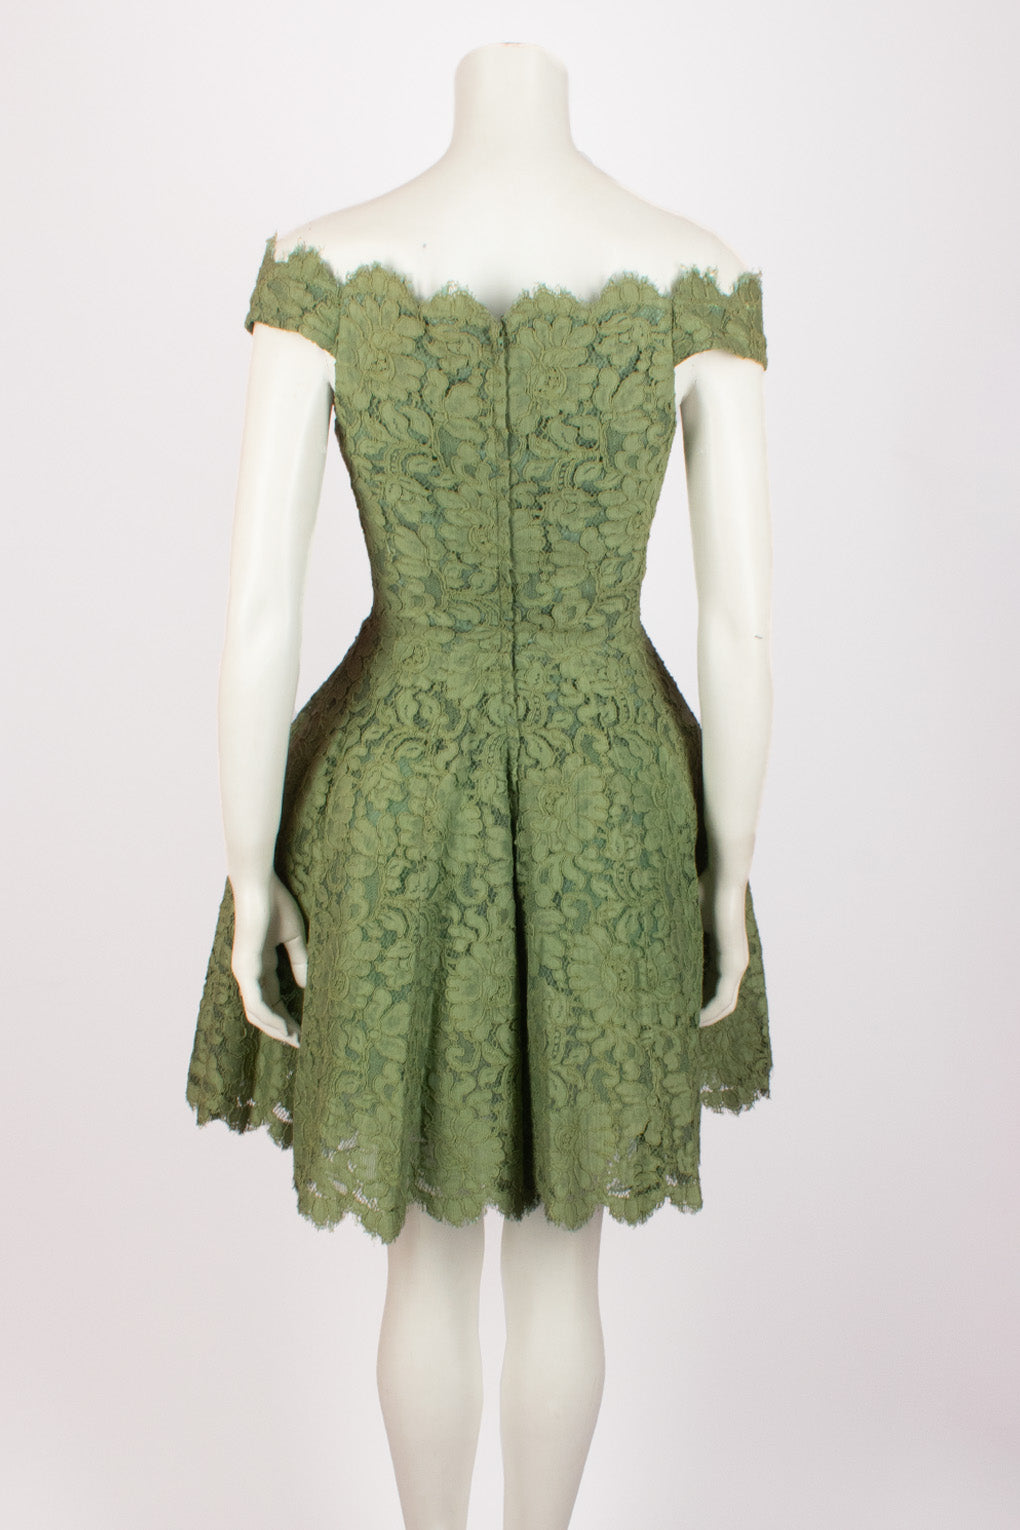 ANTONY PRICE Corseted Green Lace Dress